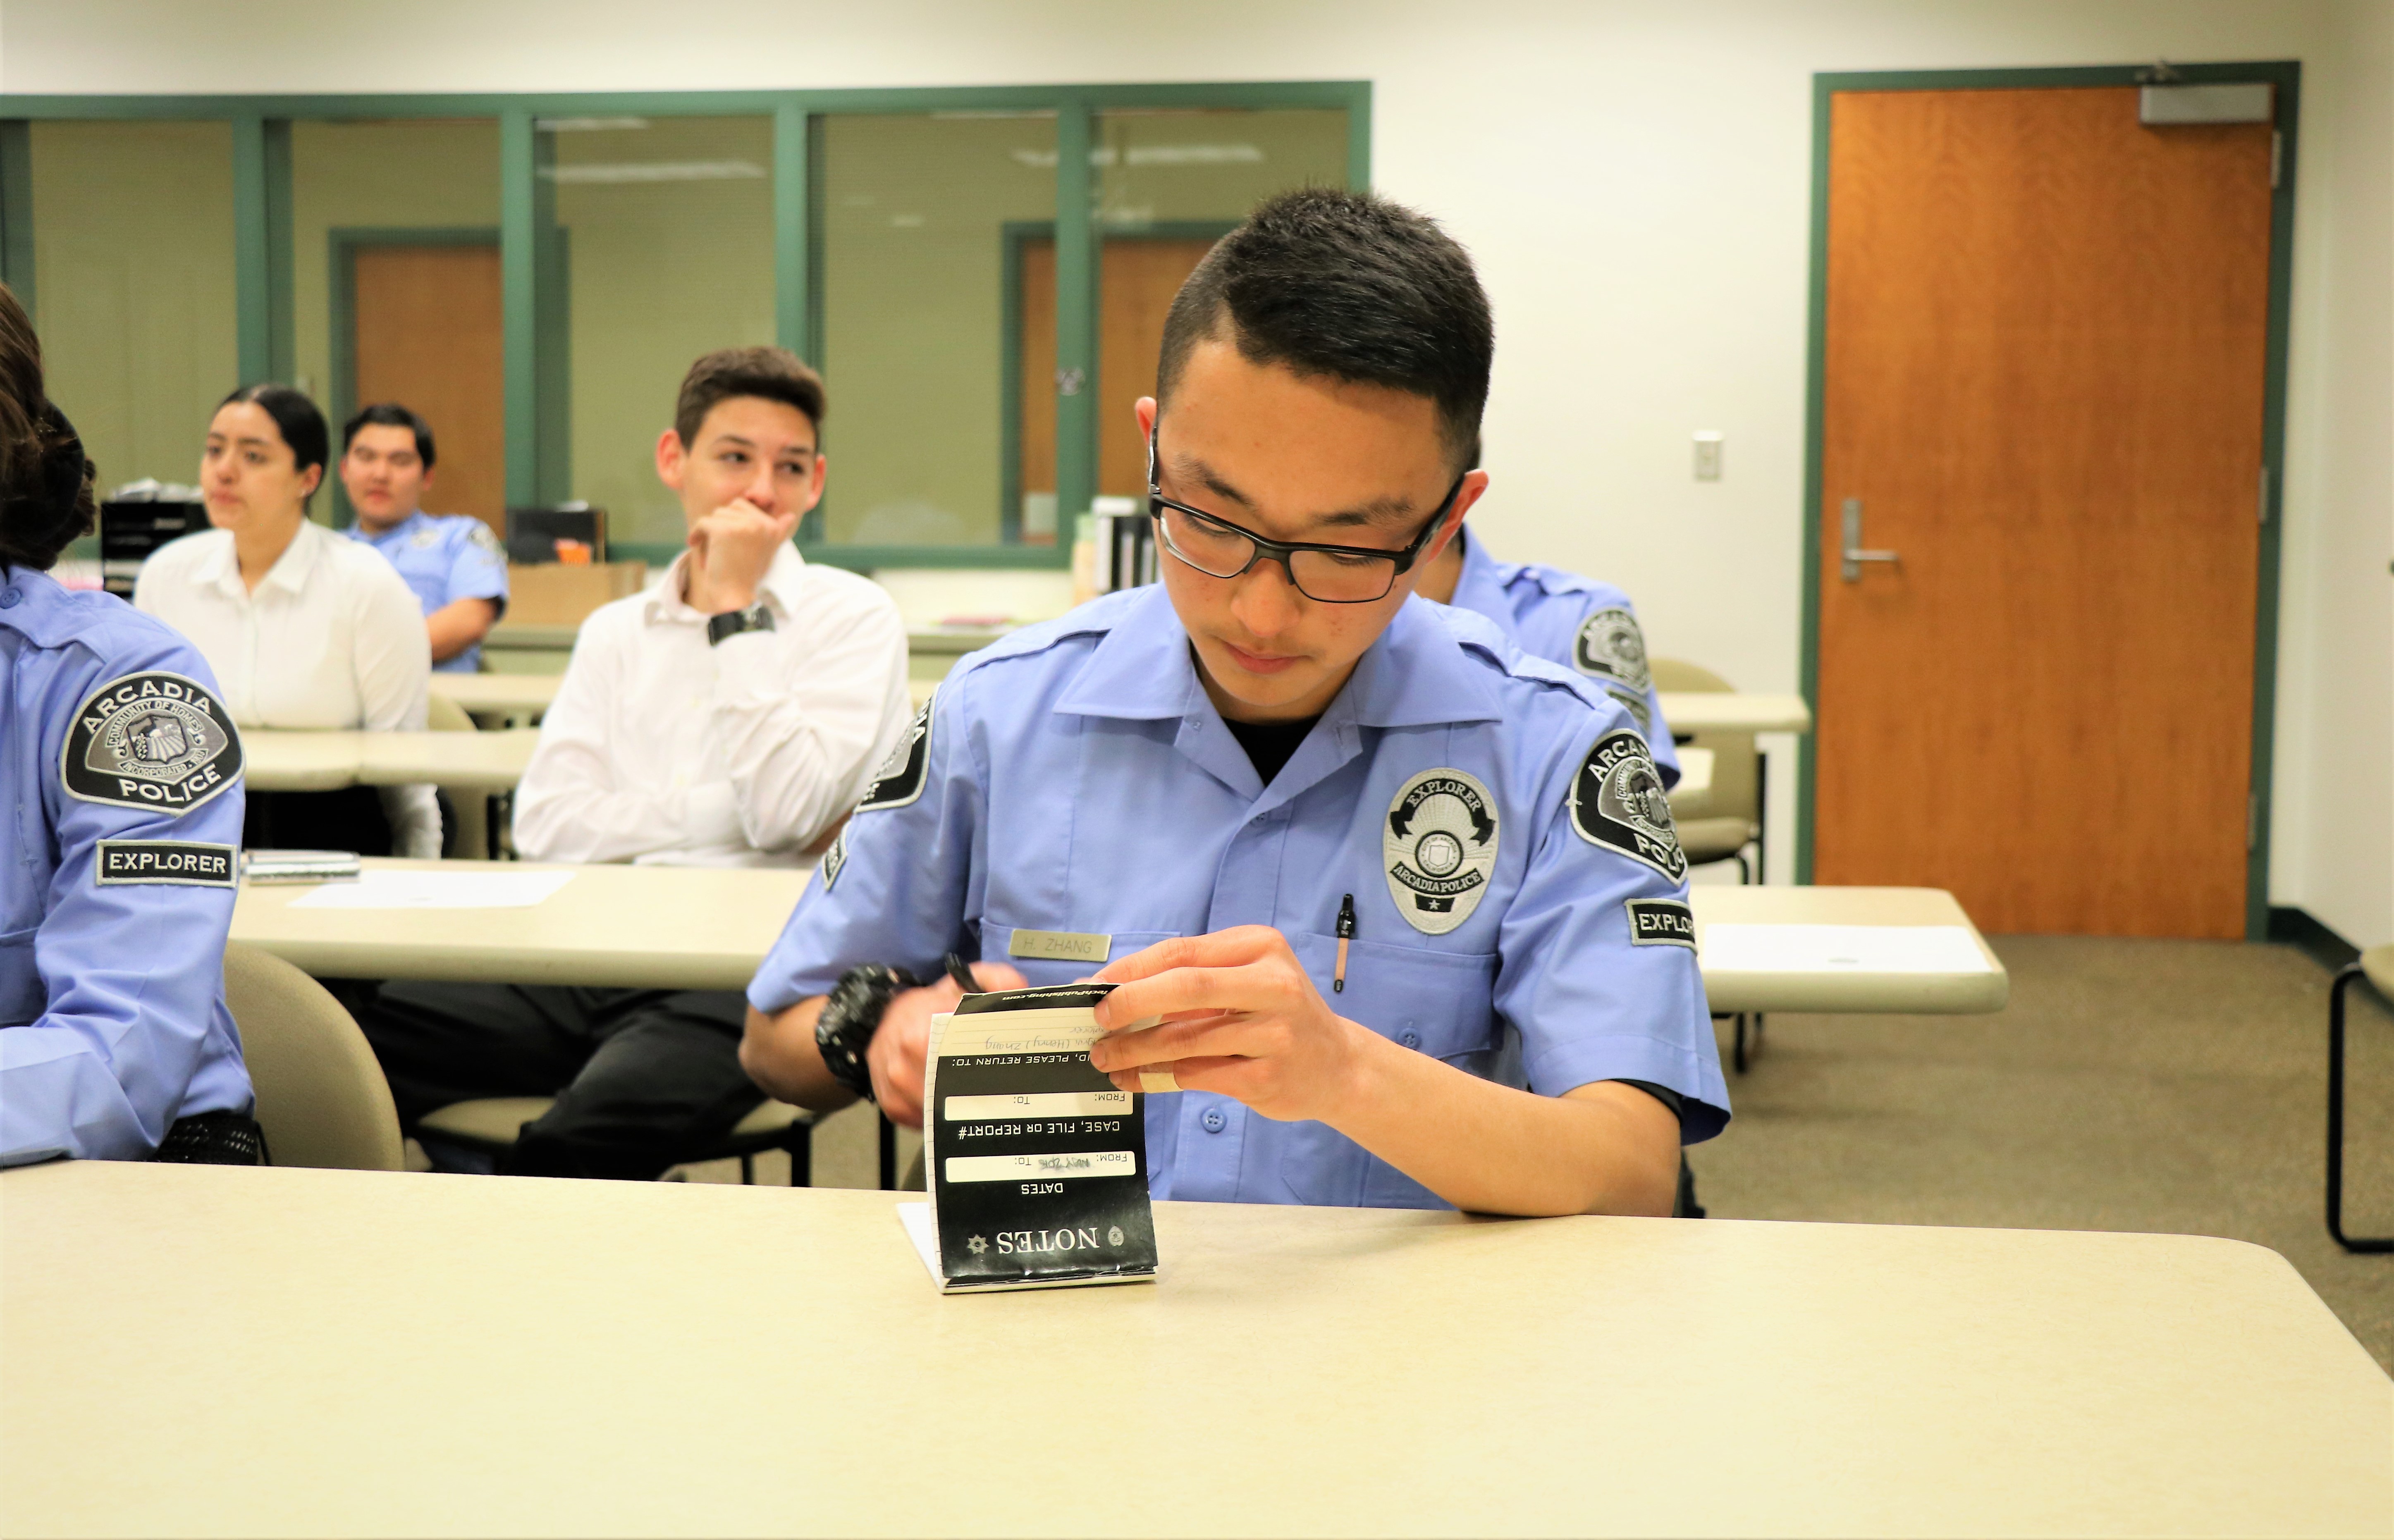 Zhang explores career in police force